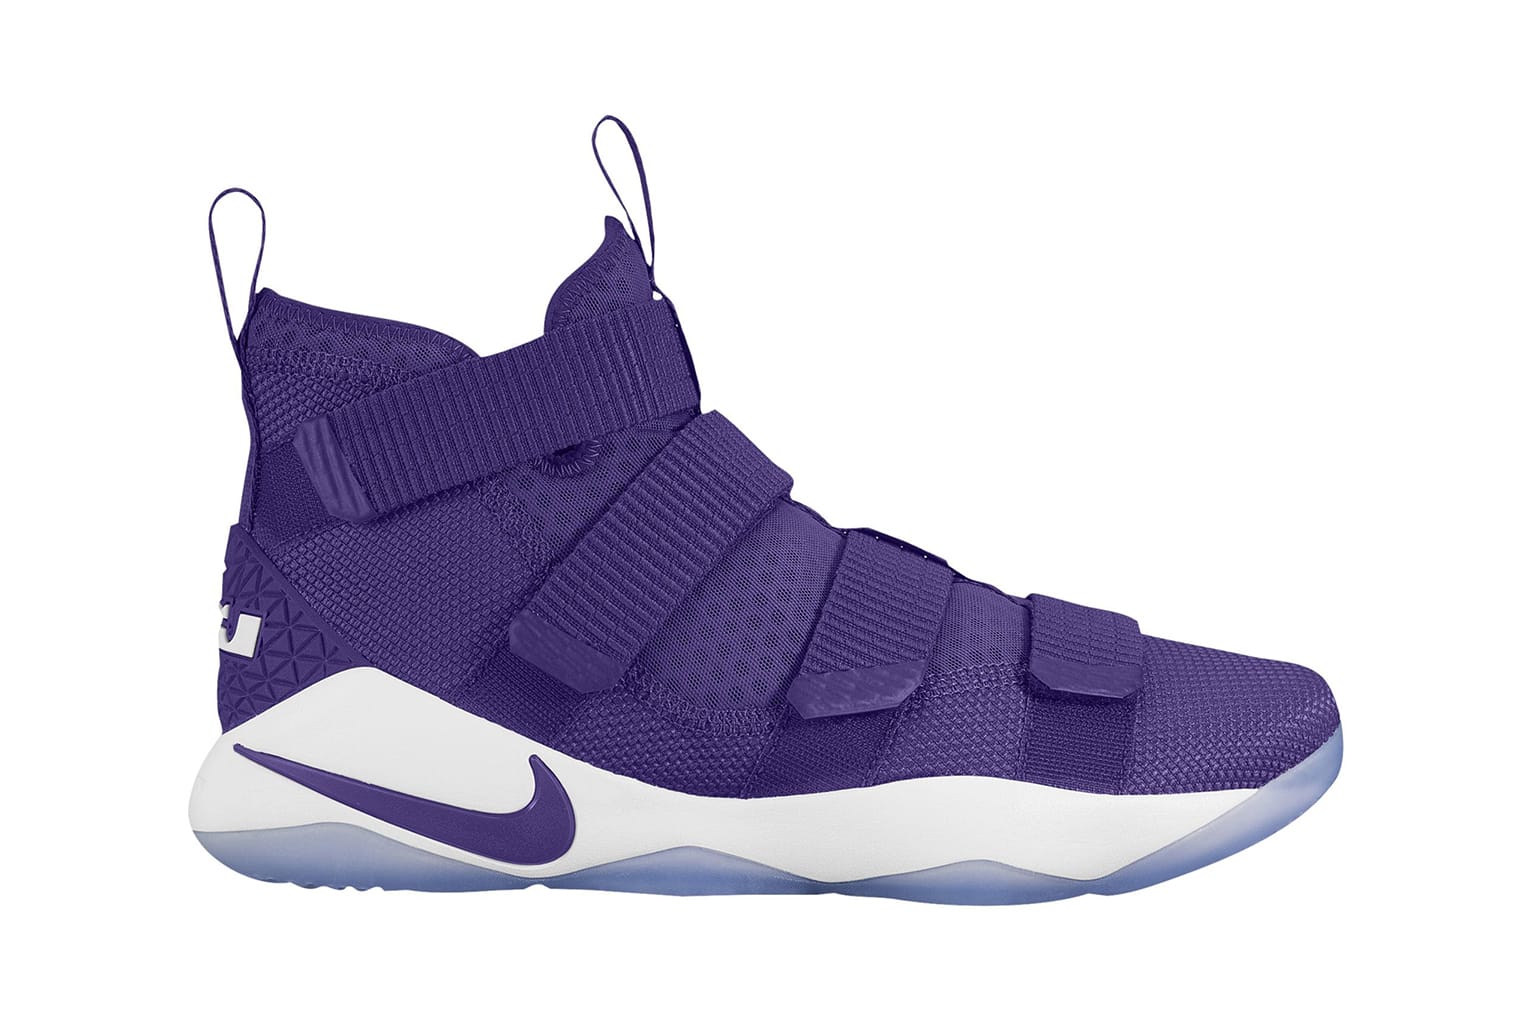 lebron soldier 11 purple and black